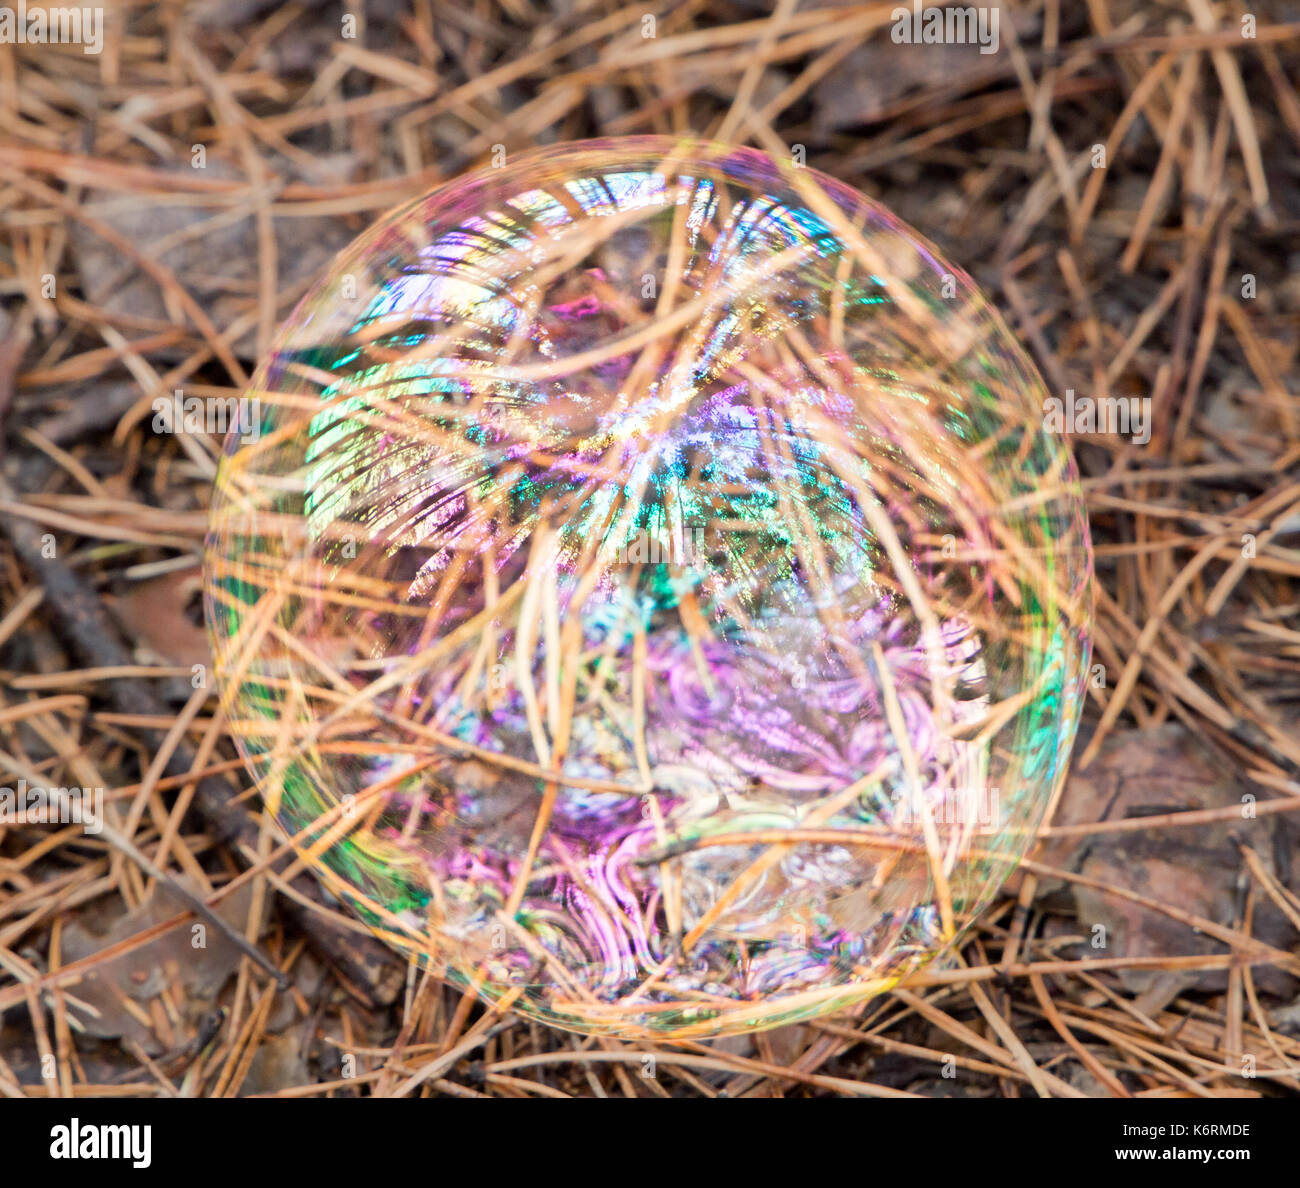 soap bubble against the autumn pine Forest background Stock Photo